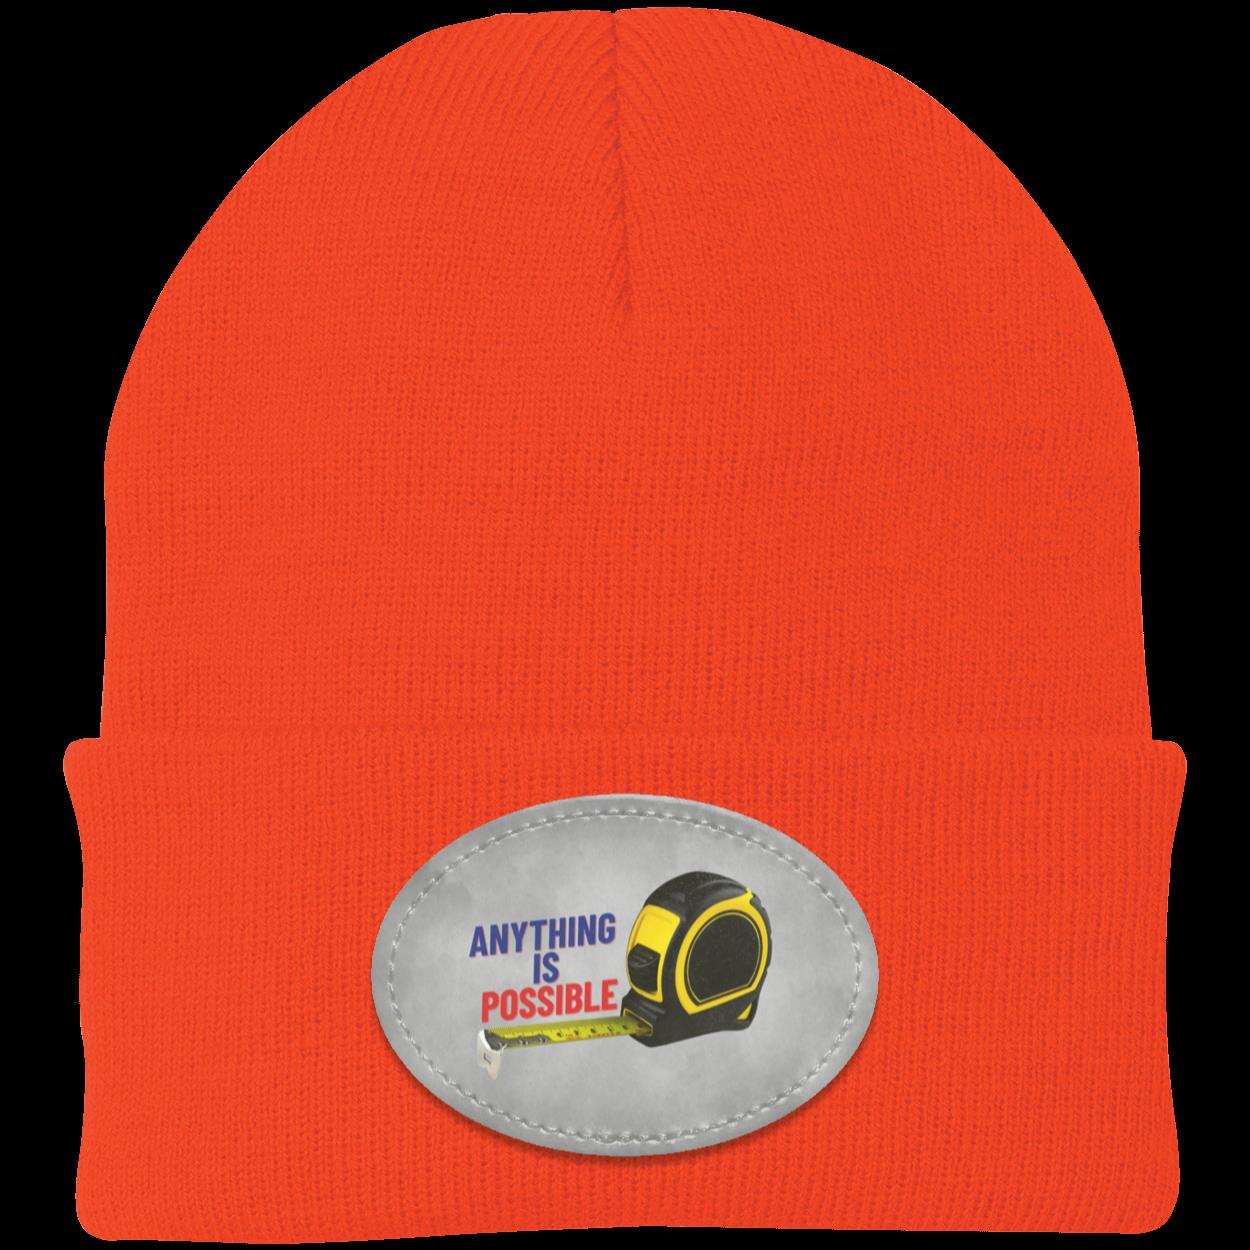 Anything is Possible Measuring Tape Knit Beanie with Printed Patch in Assorted Colors